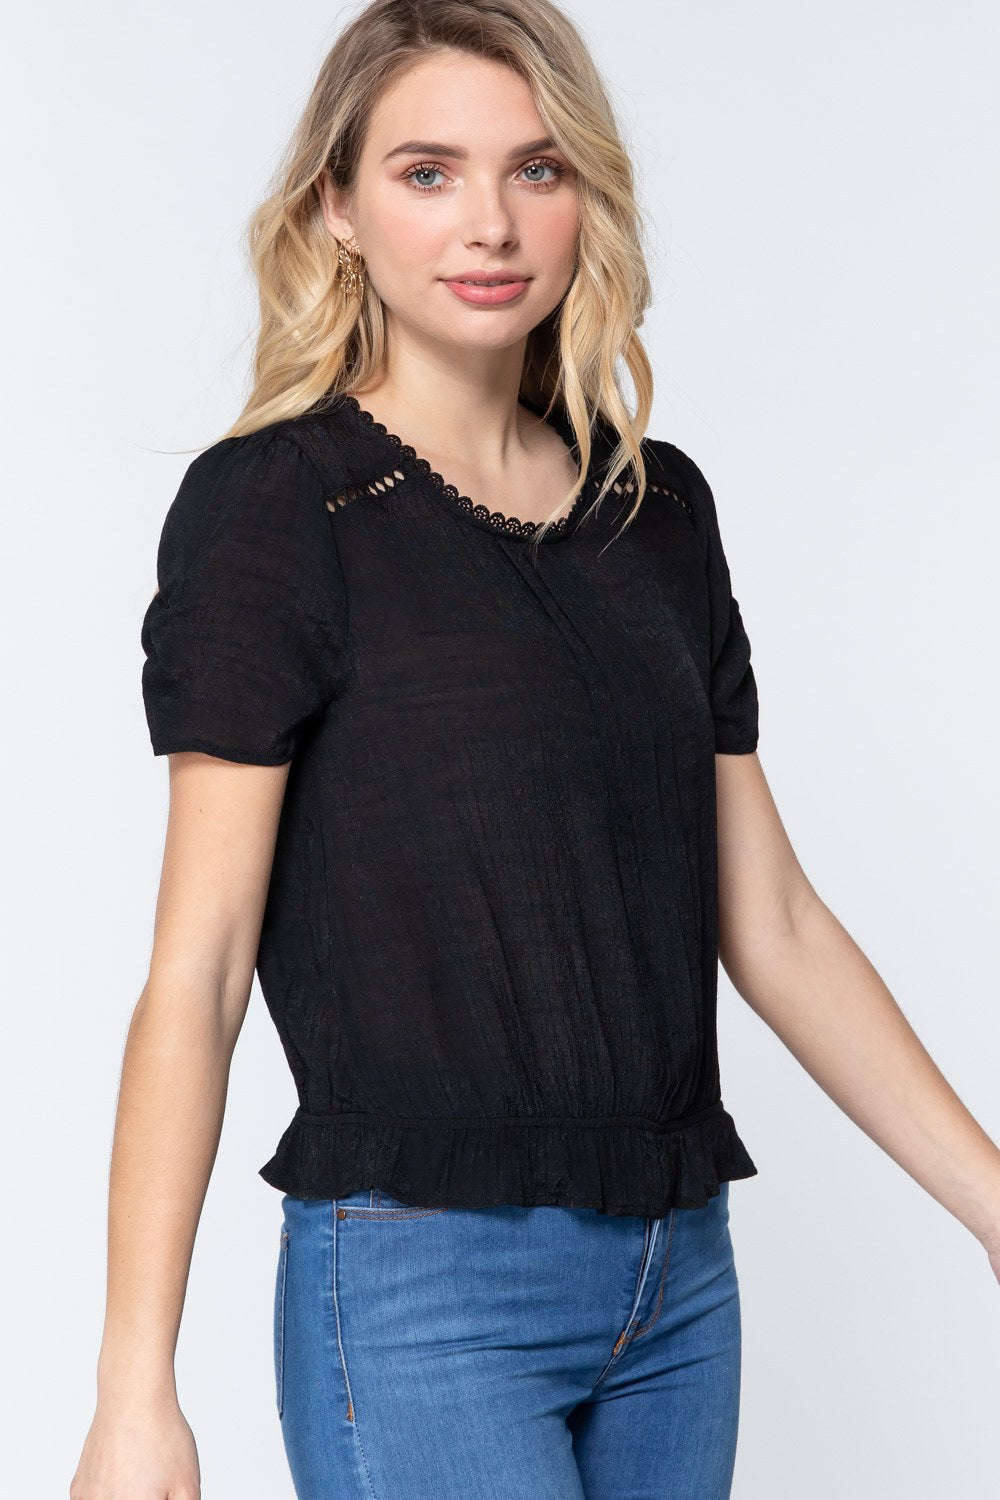 Short Shirring Slv Pleated Woven Top - Better Price Retail